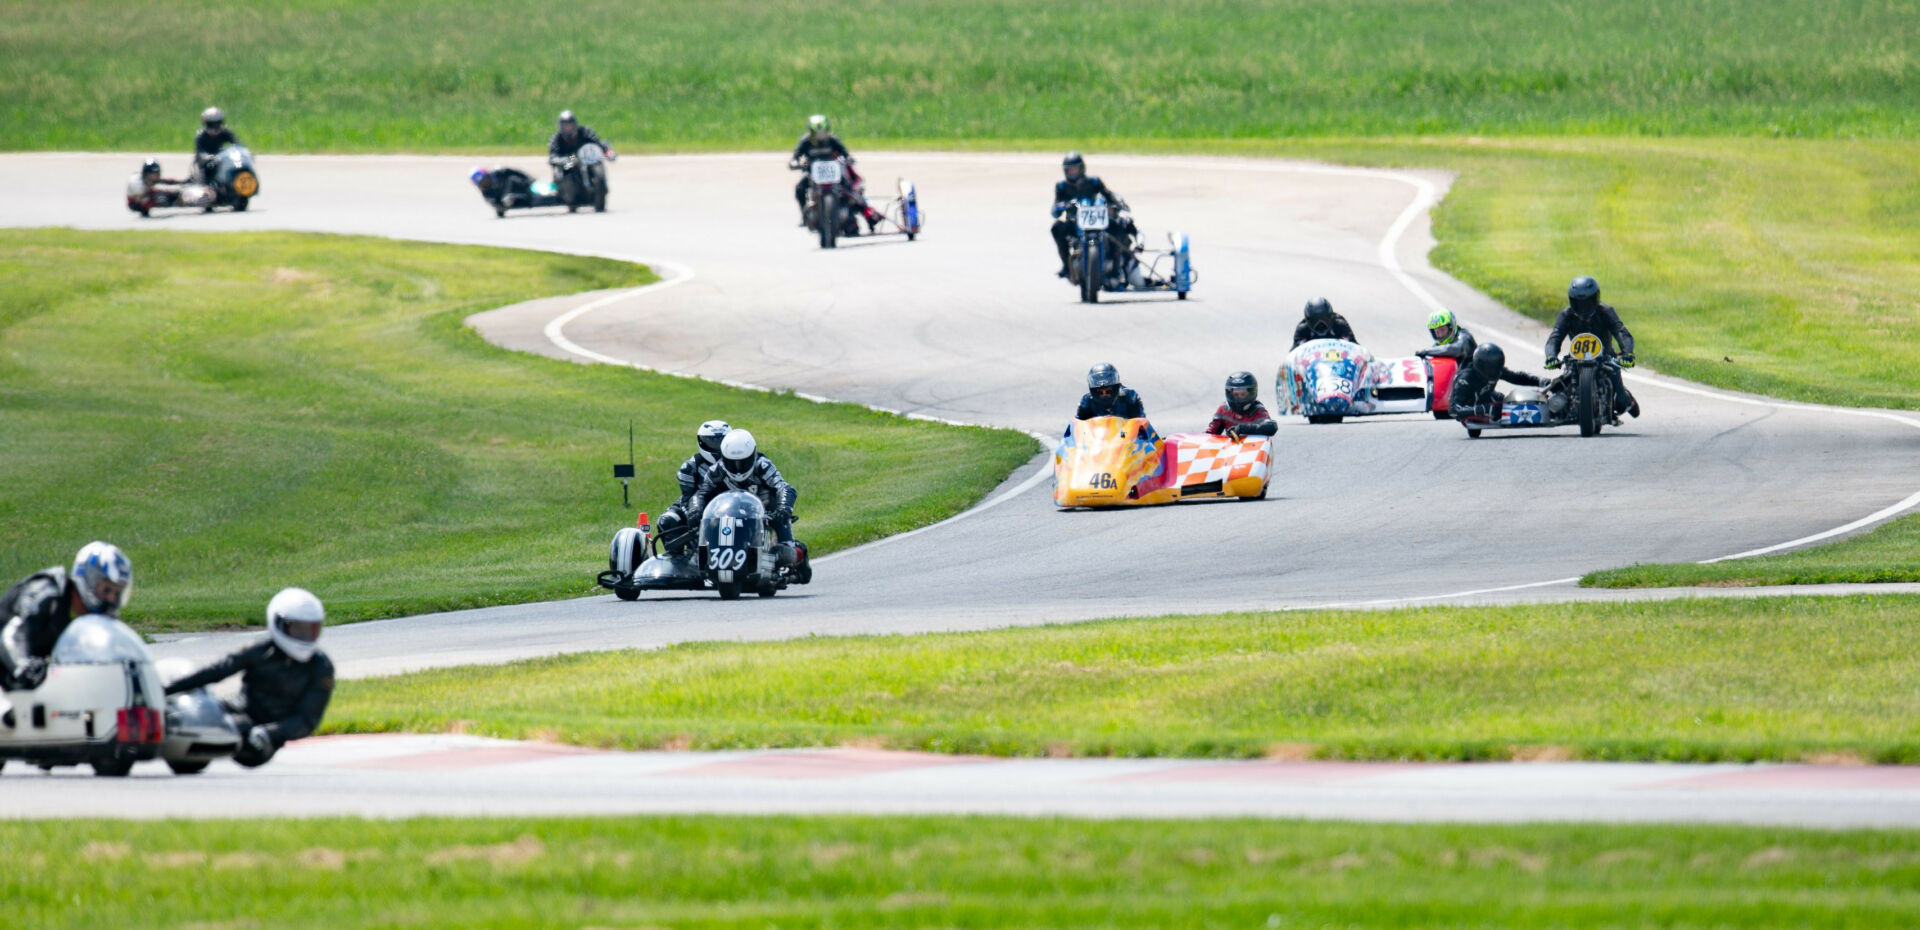 Pilot Daniel May and passenger Craig Chawla (93) lead a combined sidecar race at the AHRMA event at Nelson Ledges. Photo by Cathy Drexler, courtesy AHRMA.